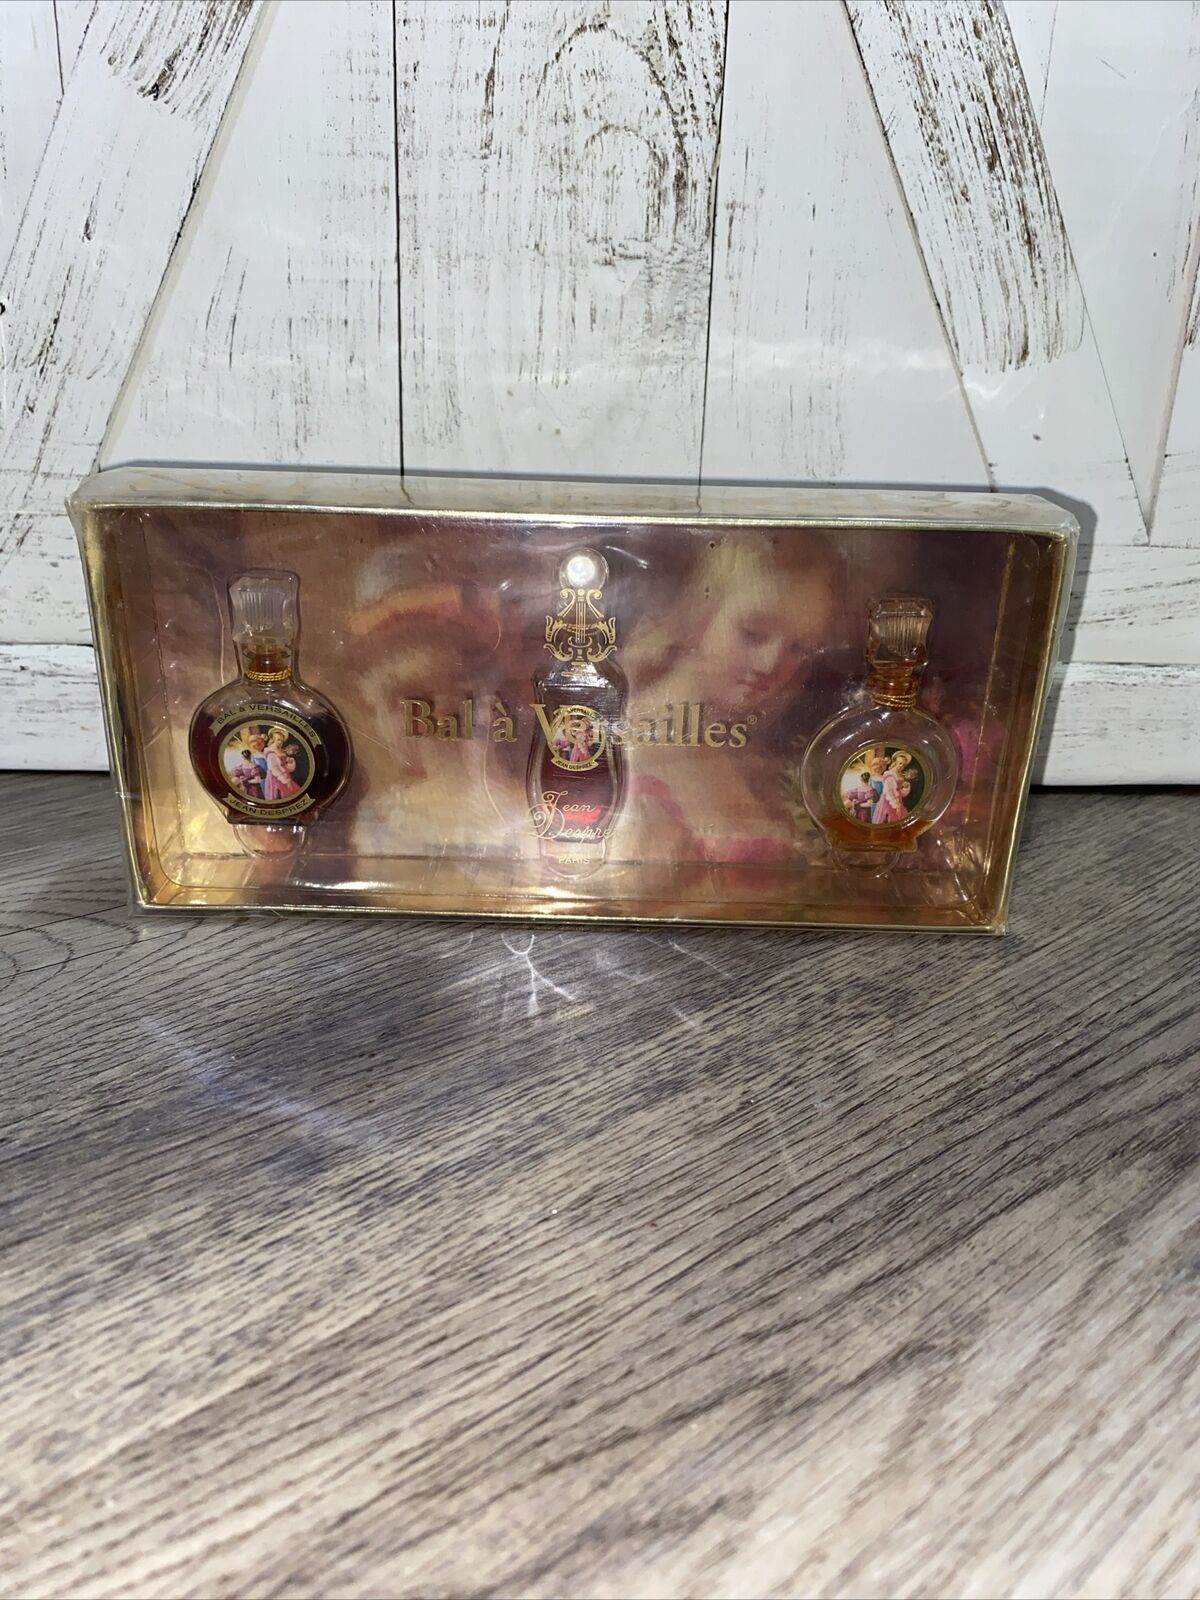 Bal a Versailles Vintage Perfume Gift Box (3) Bottles Included